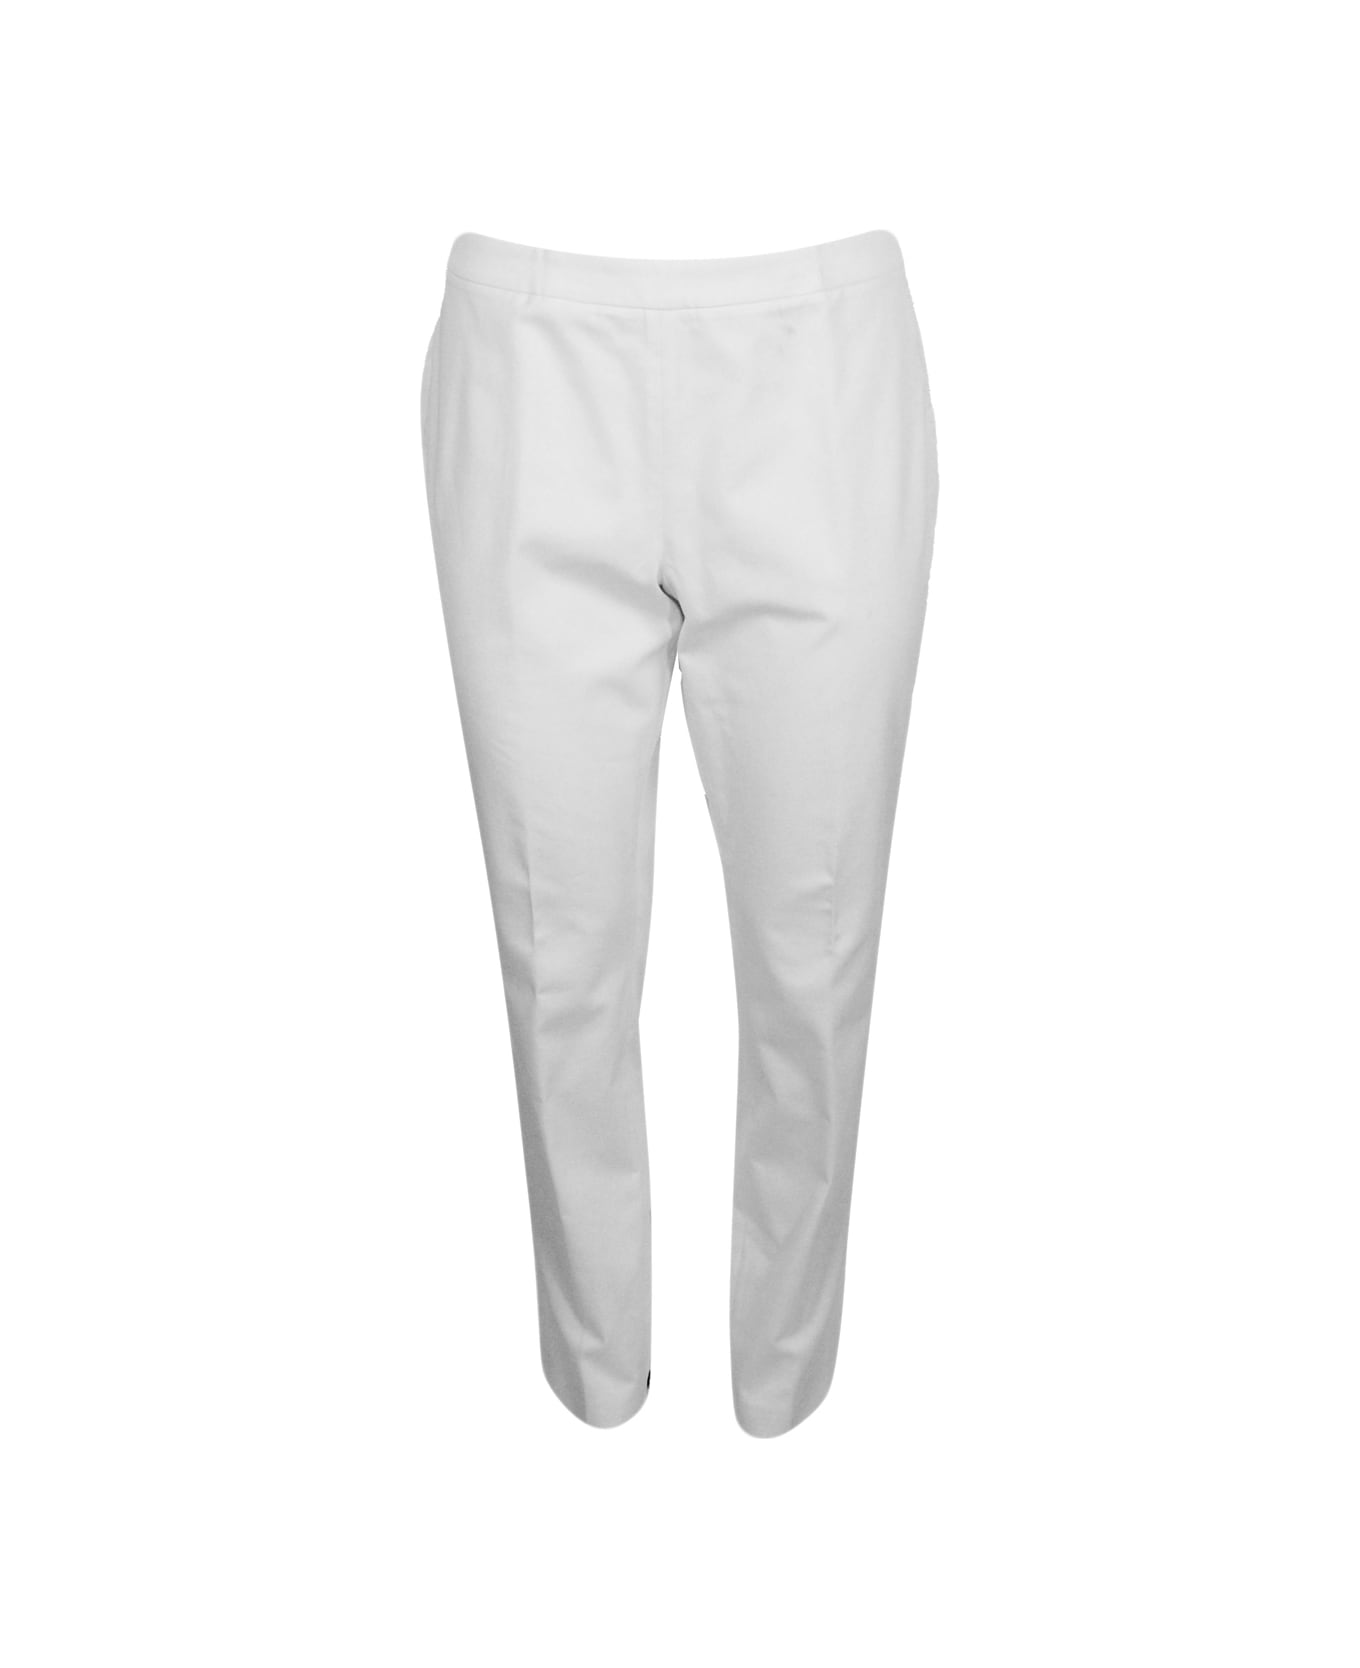 Fabiana Filippi Stretch Cotton Poplin Trousers Are Characterized By A Slim Fit And A Zip Closure On The Side - White